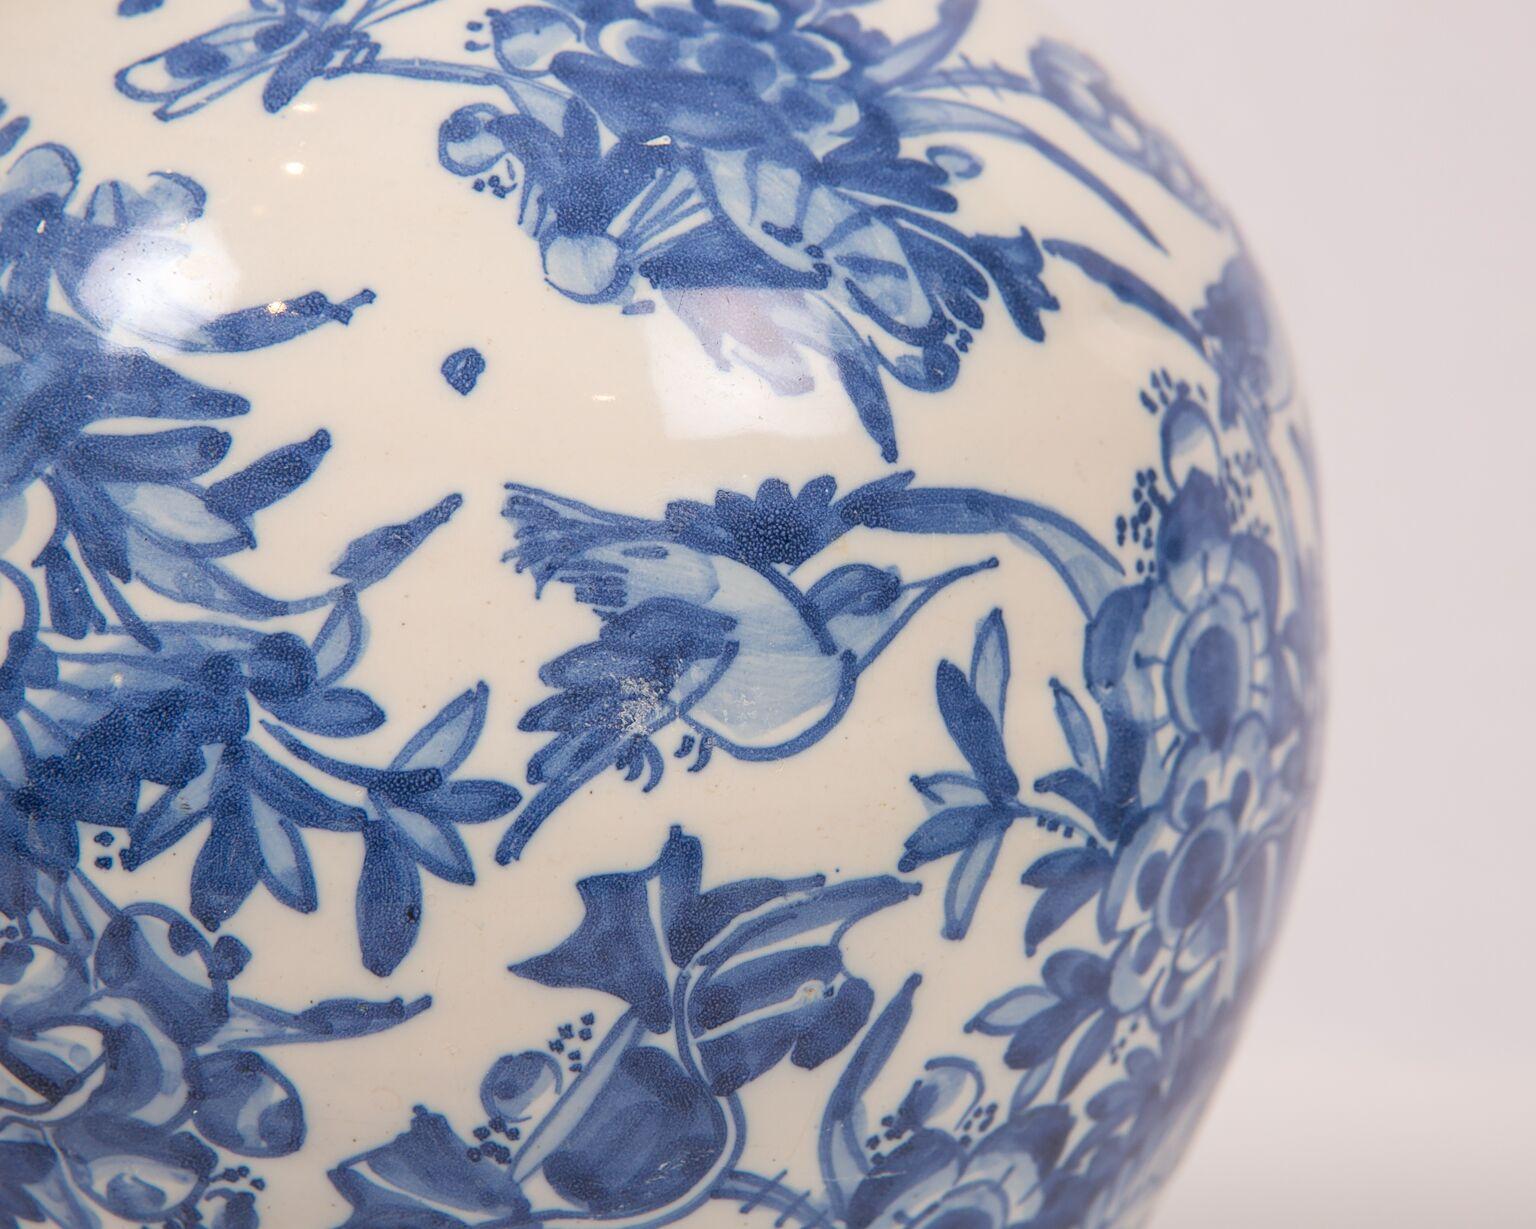 Chinoiserie London Delftware Blue and White Flower Vase 17th Century circa 1685